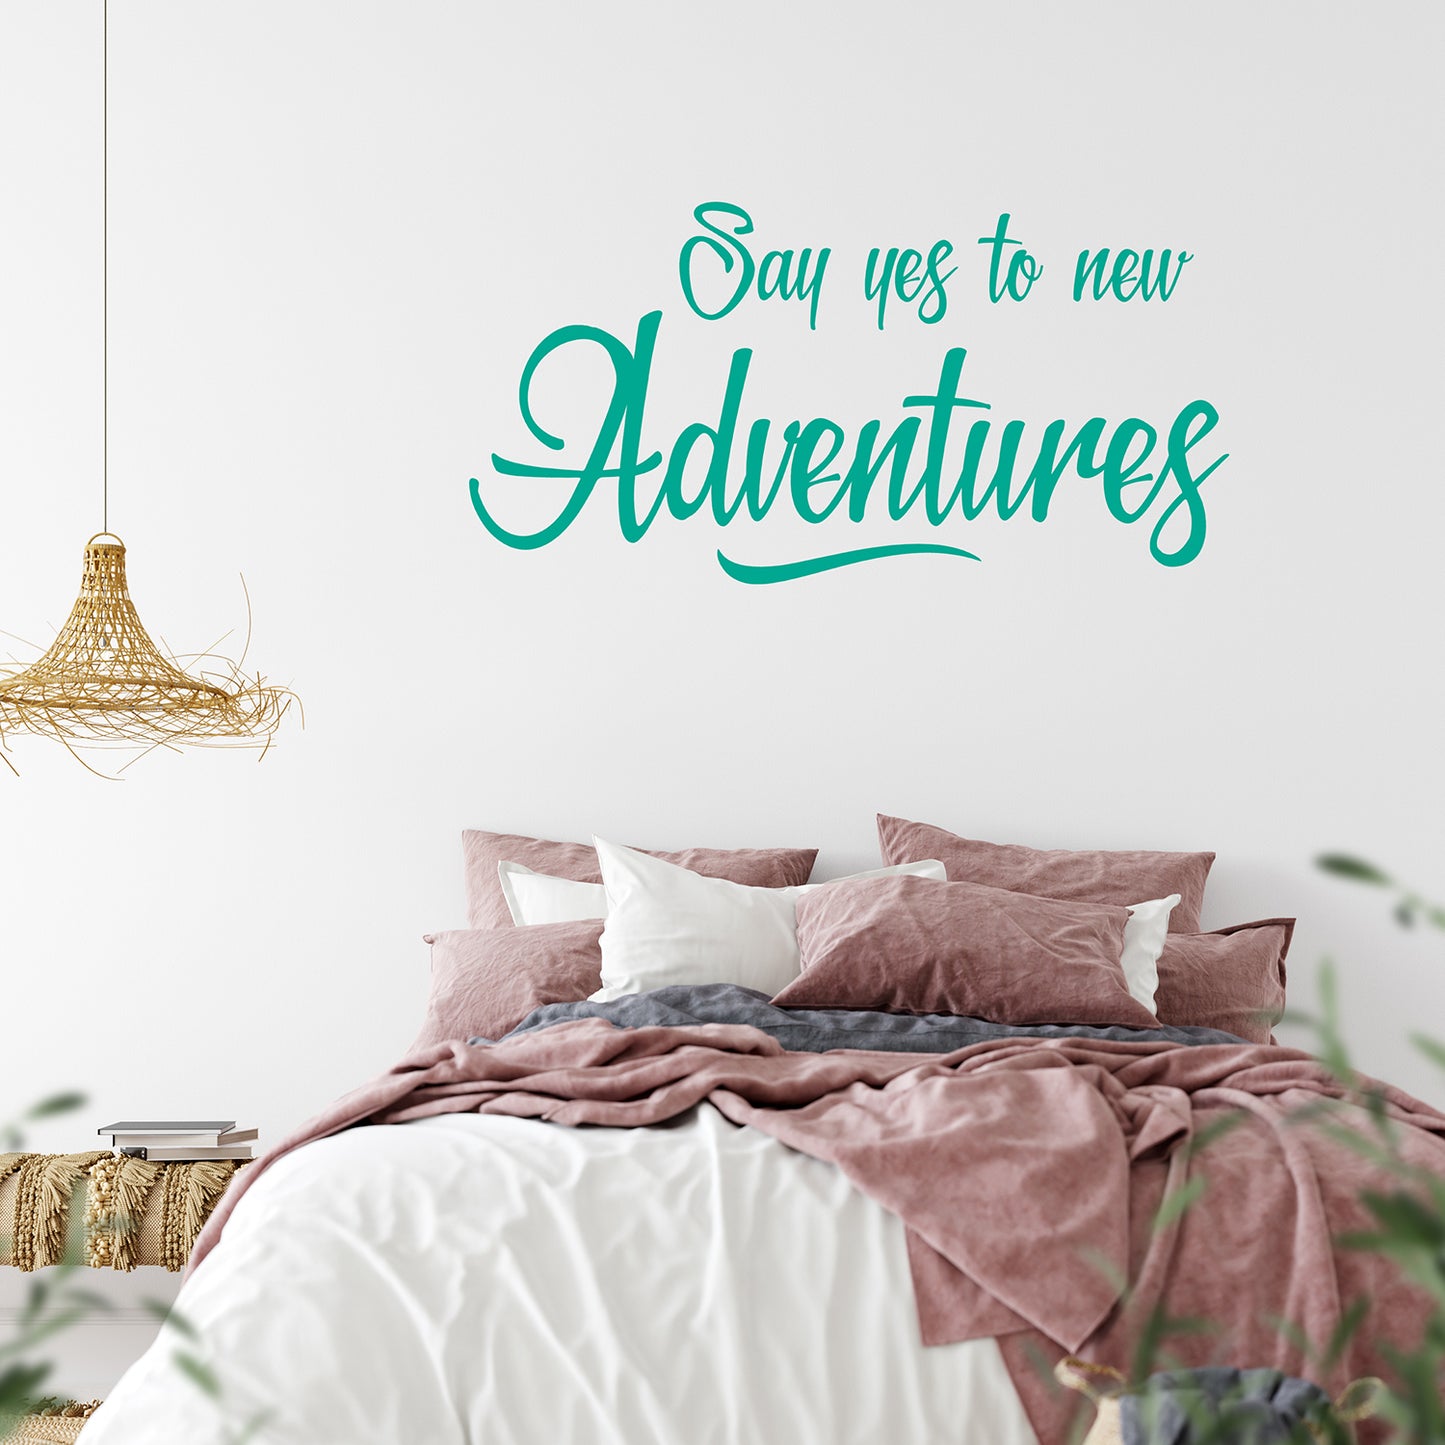 Say yes to new adventures | Wall quote